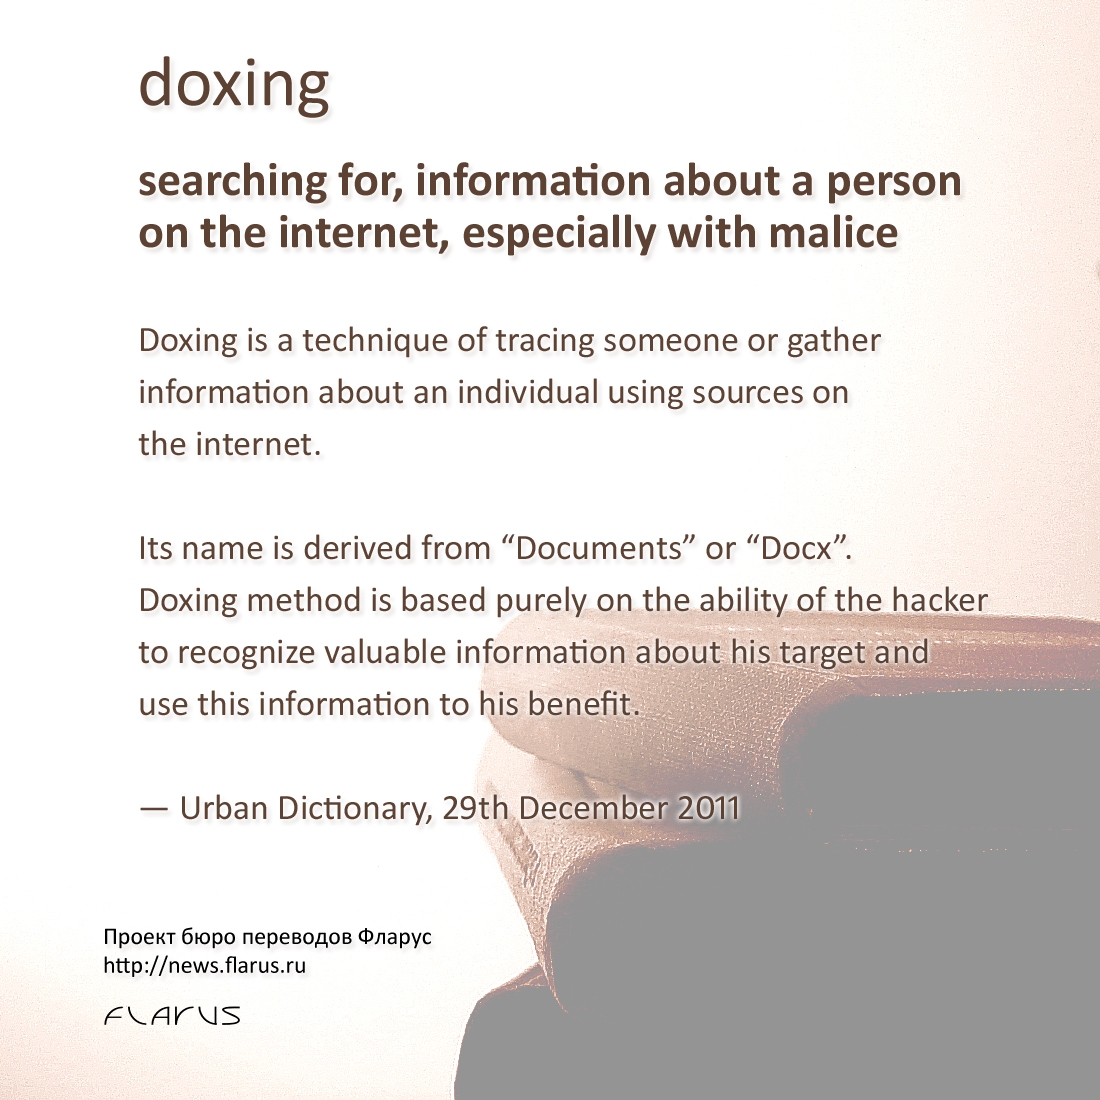 doxing